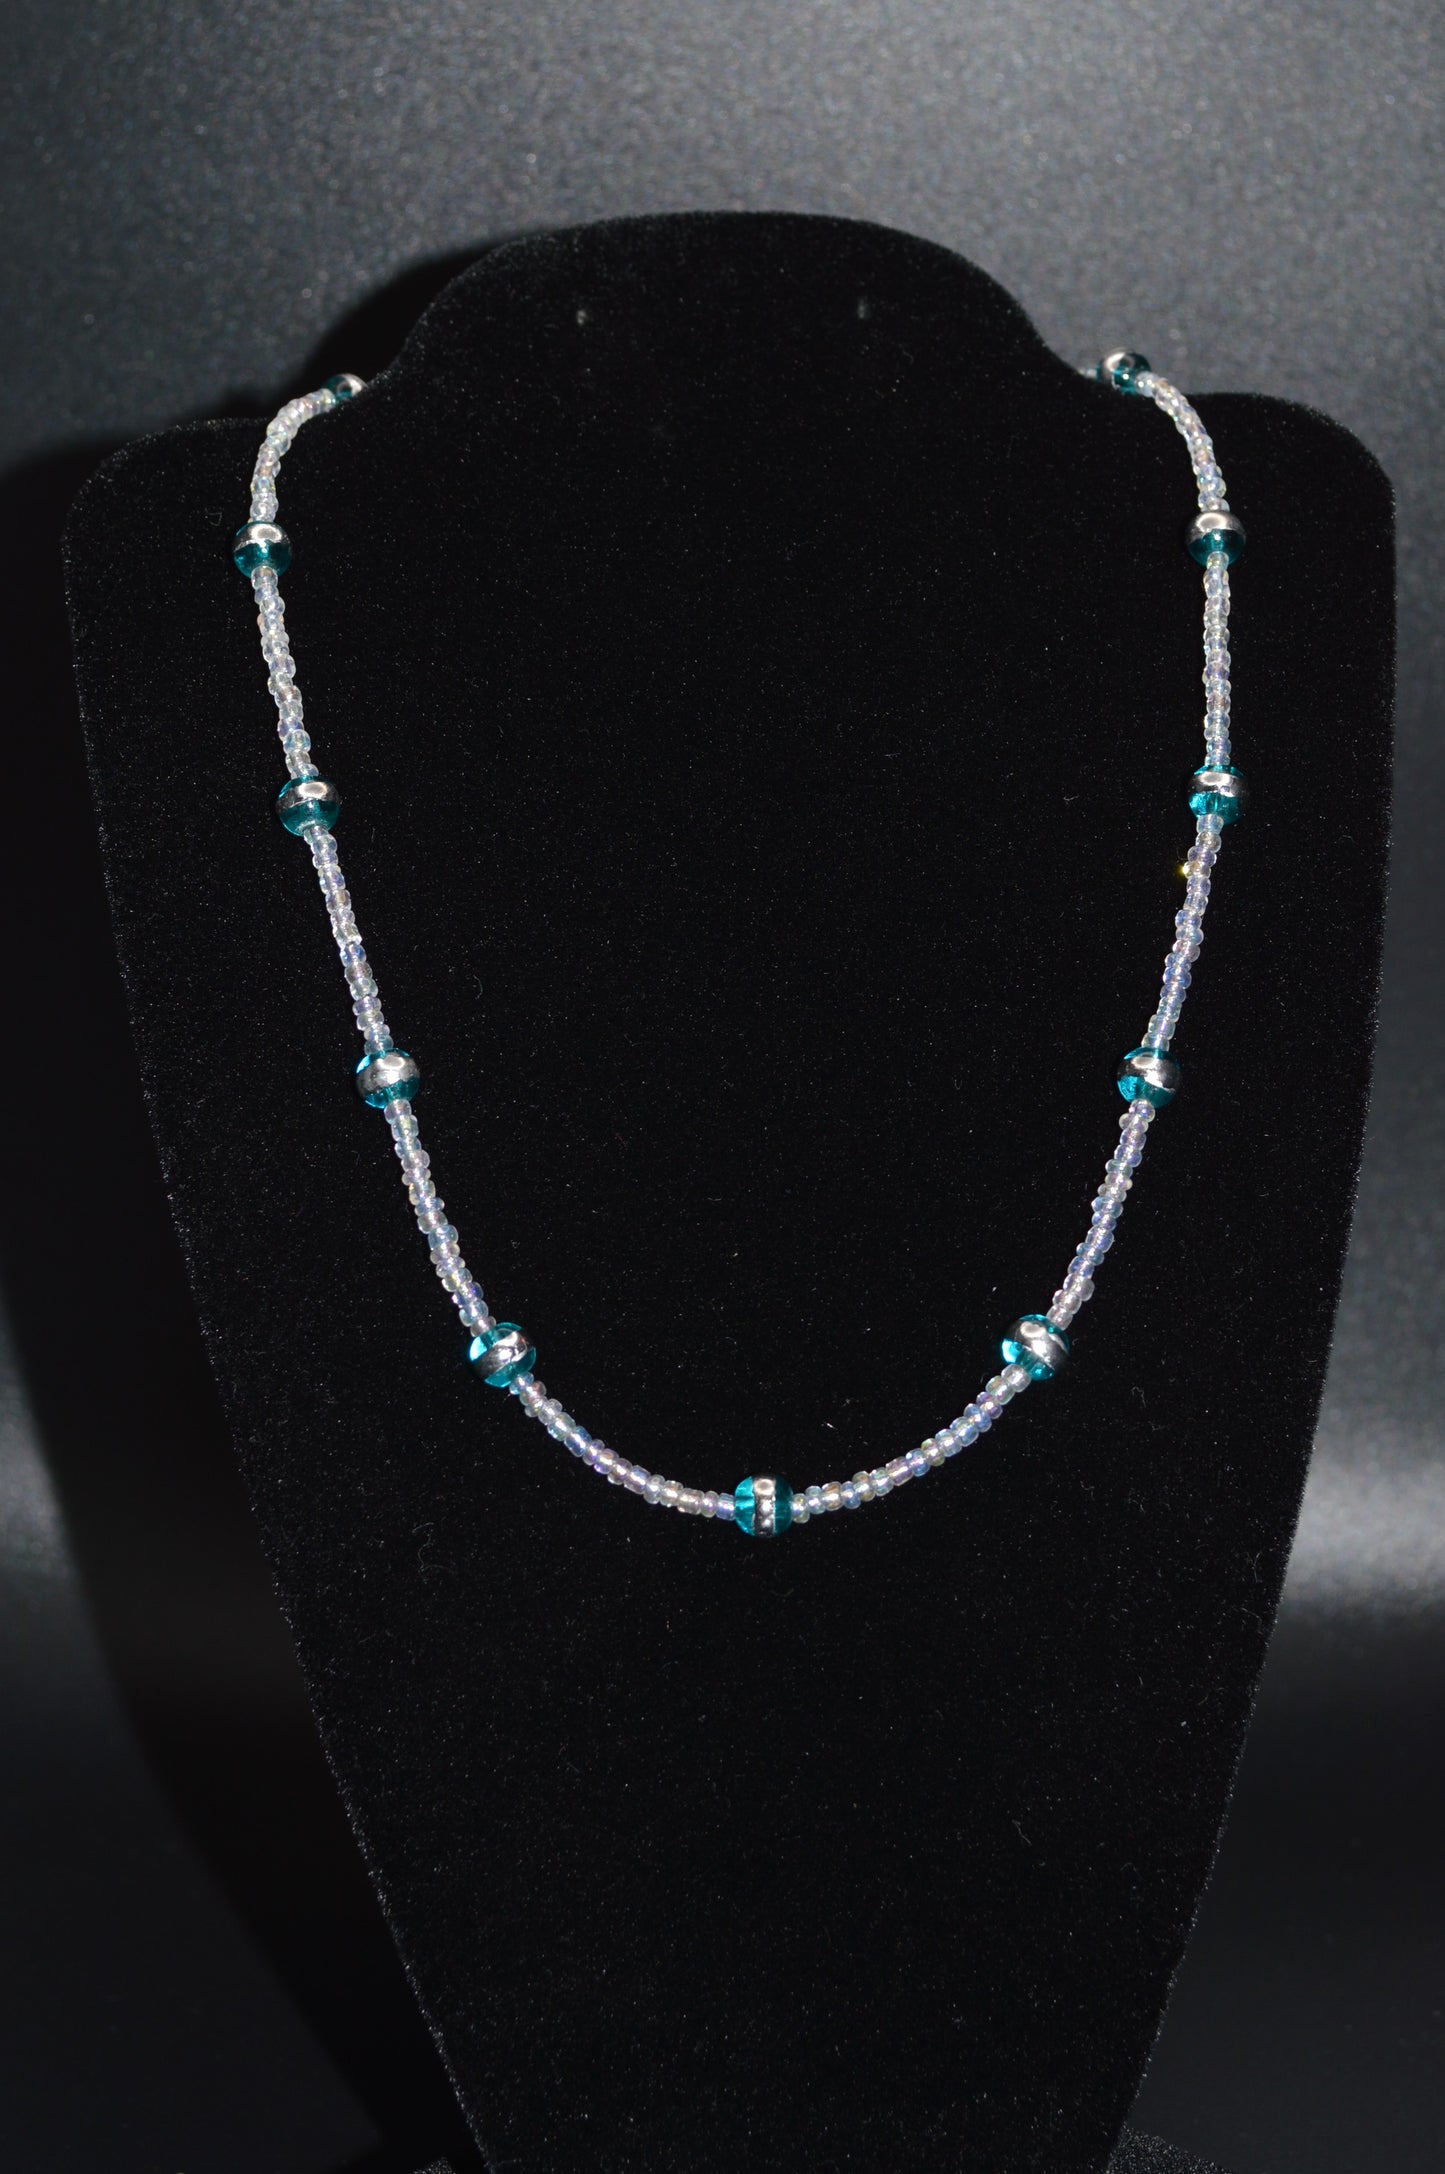 Aqua Silver Striped Glass Beads with Clear Seed Beads Necklace